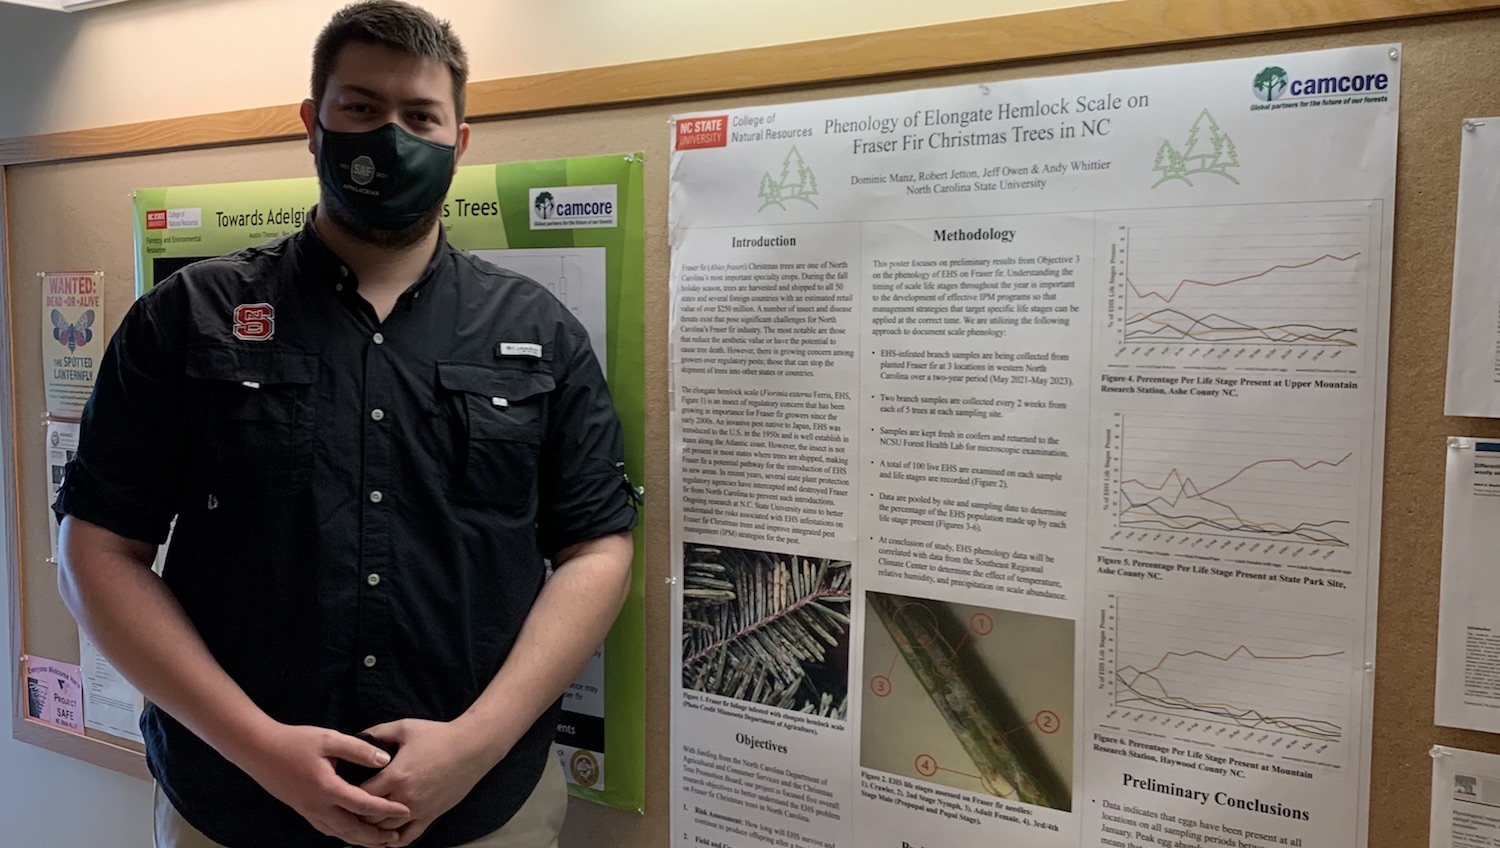 Dominic Manz - 2021 APSAF Conference Best Poster Presentation: Dominic Manz - Forestry and Environmental Resources NC State University